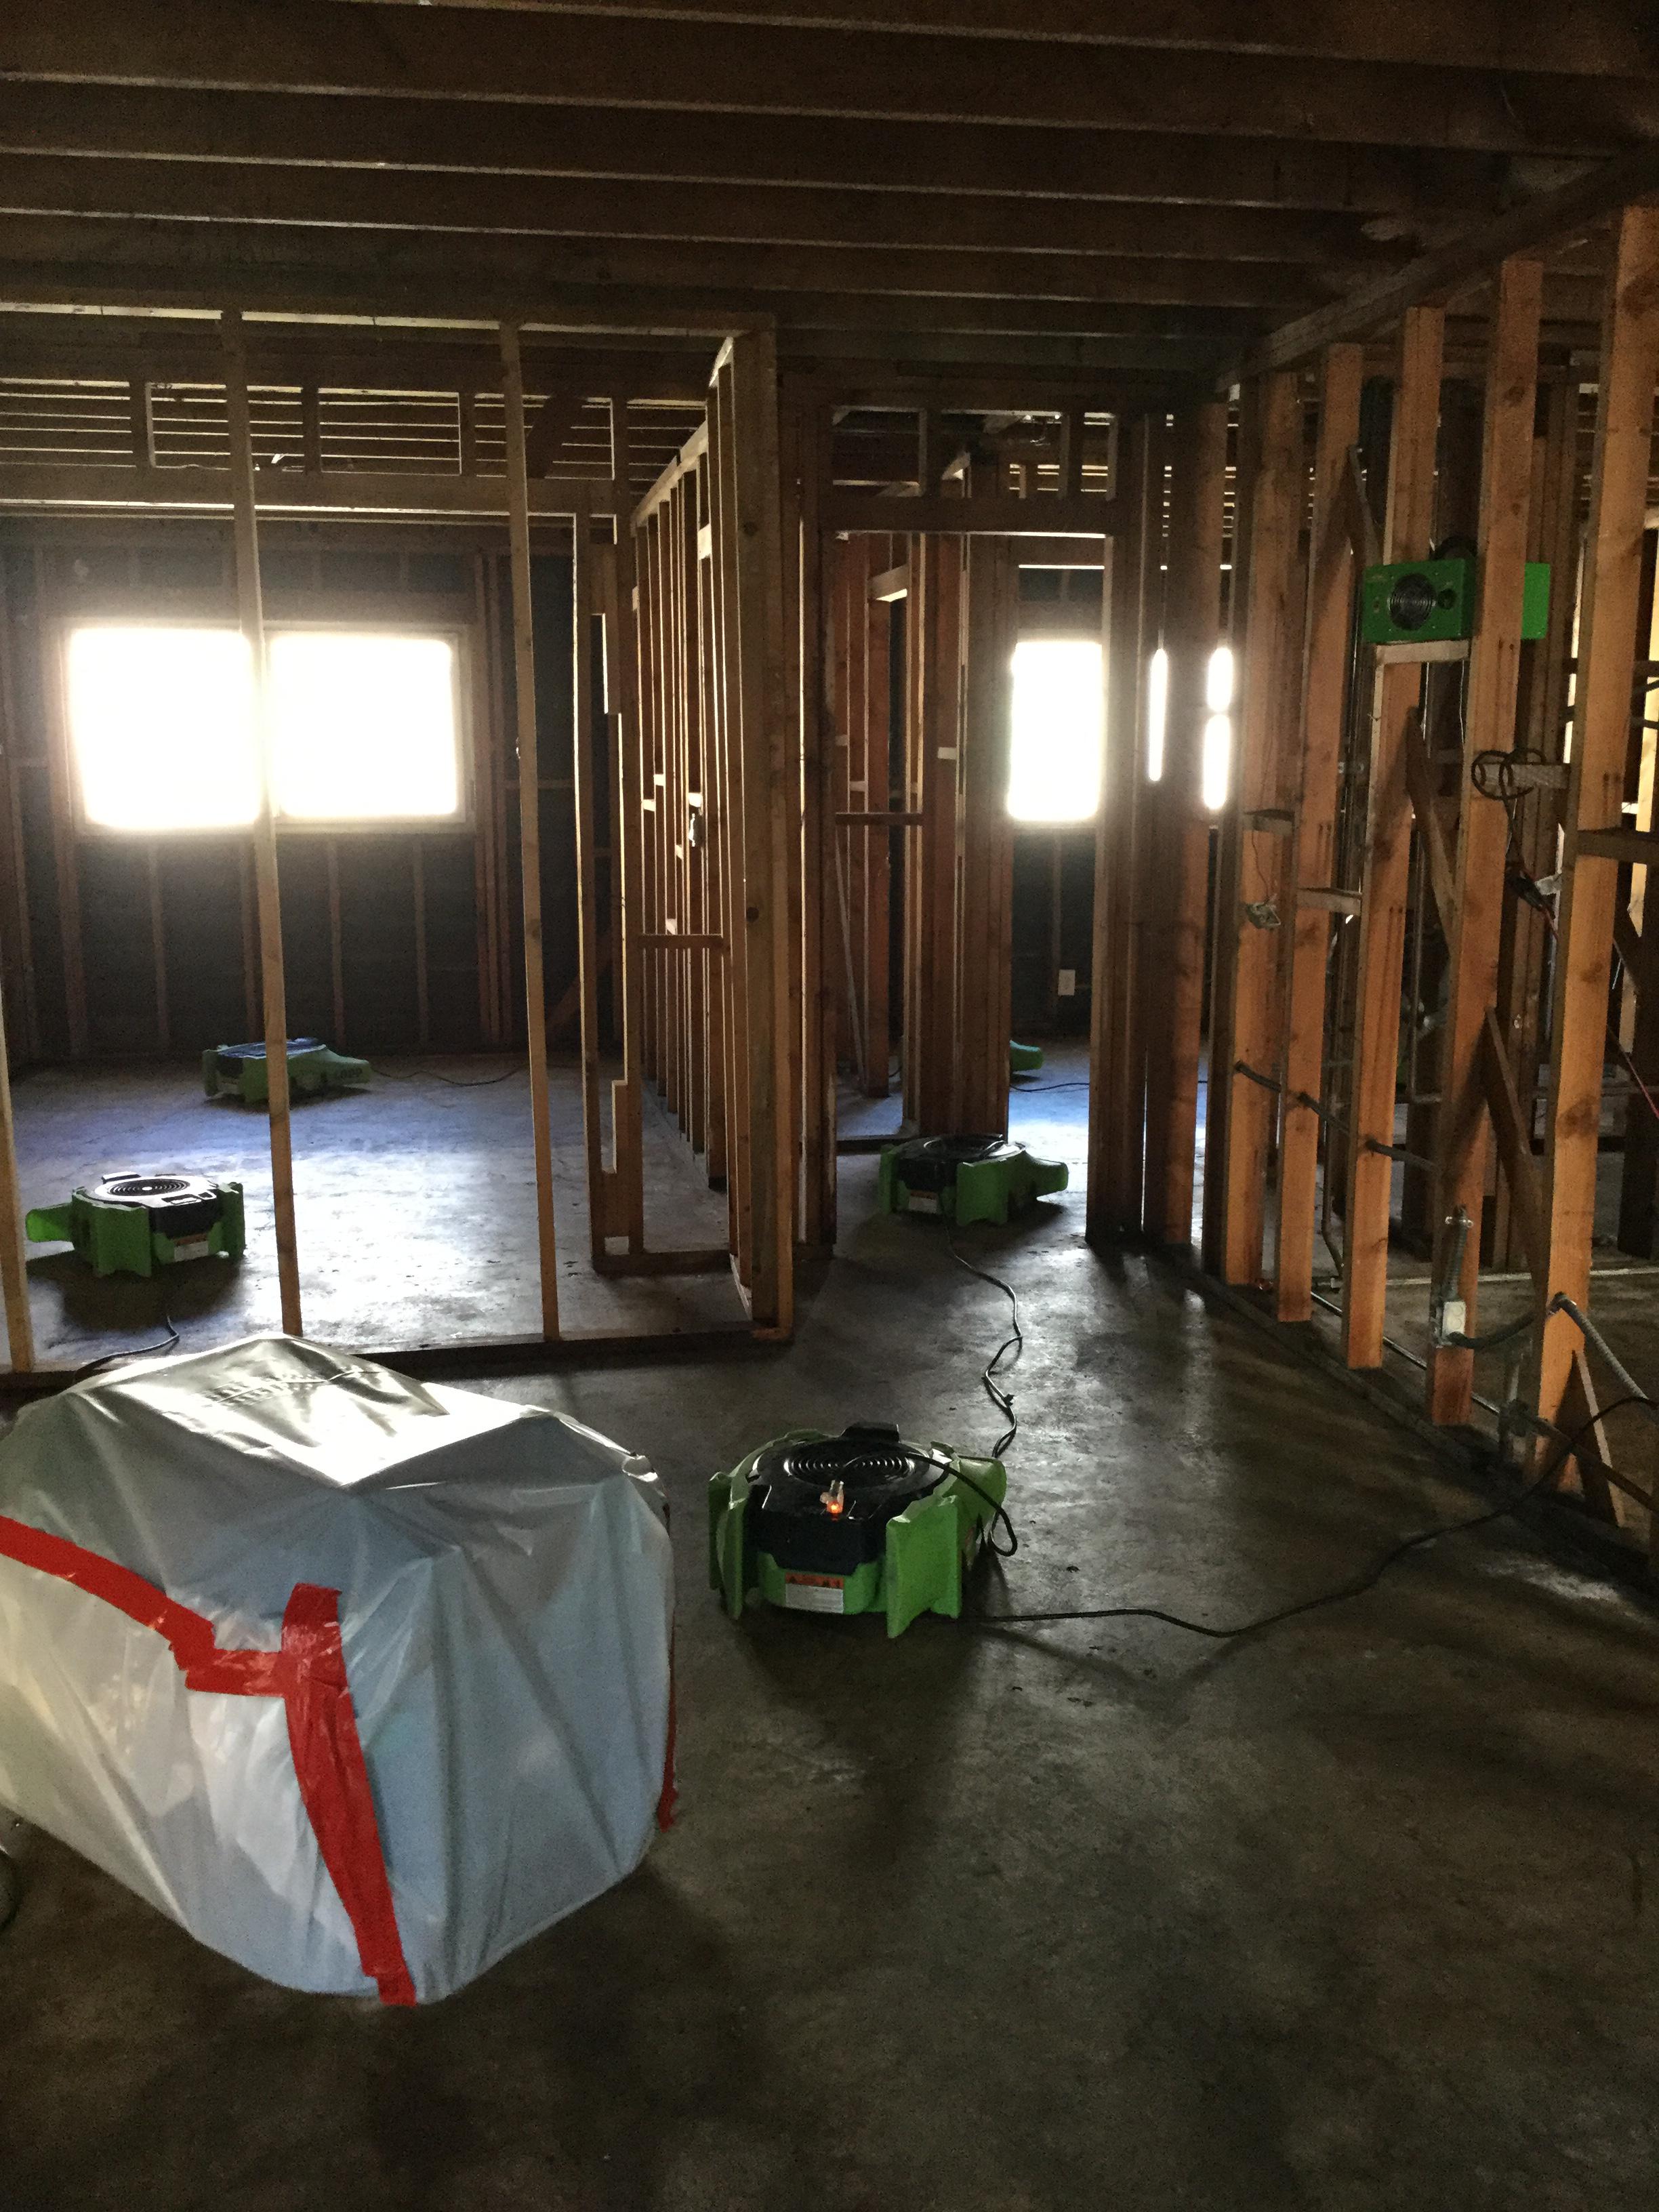 If your home or business suffers from a fire damage event, you can trust SERVPRO of Anaheim West for your fire damage restoration and cleanup needs.